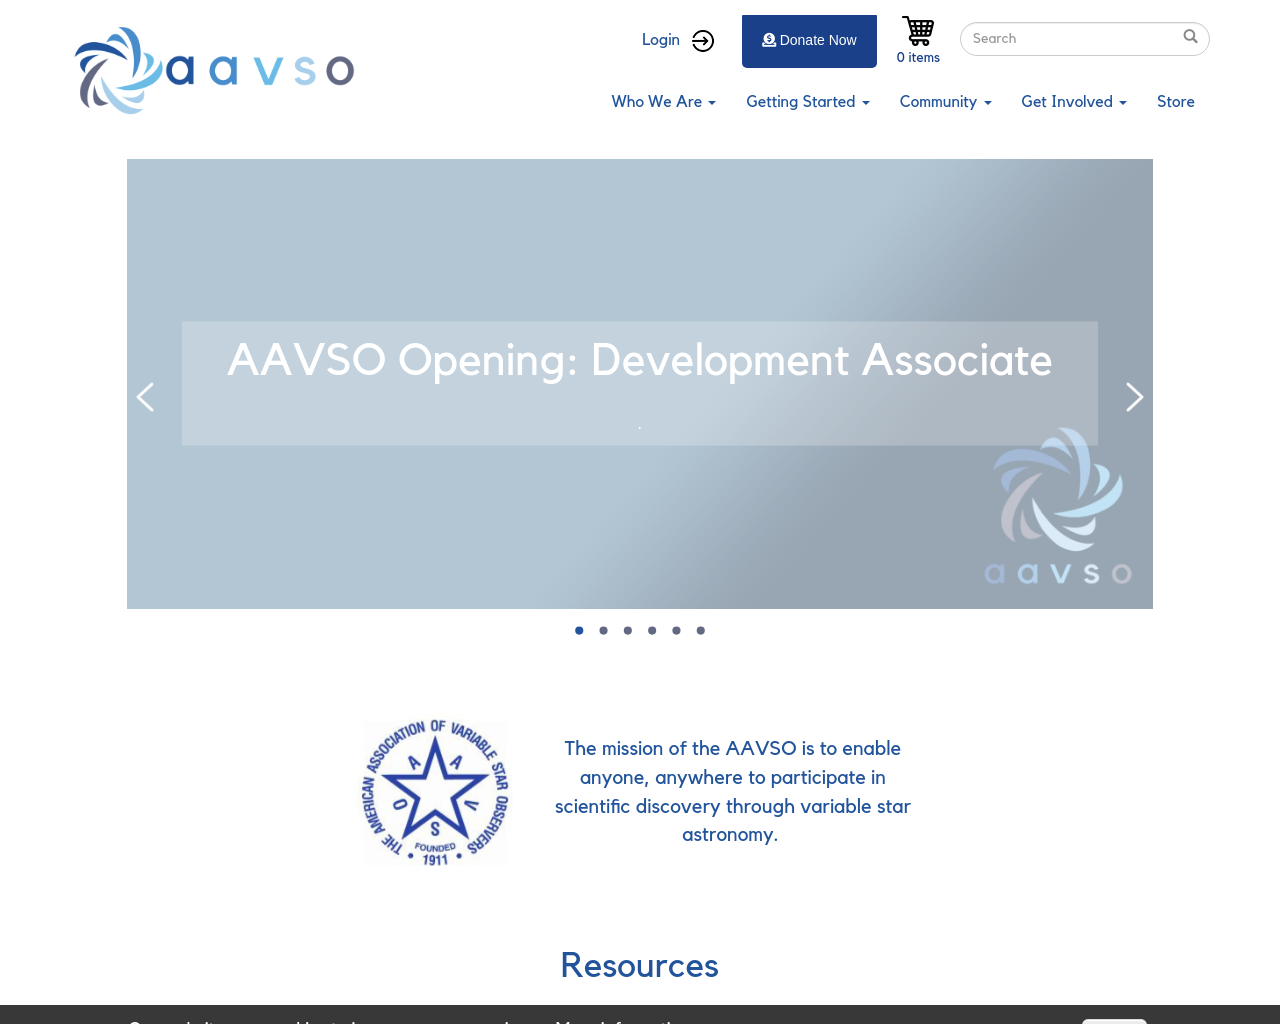 aavso.org